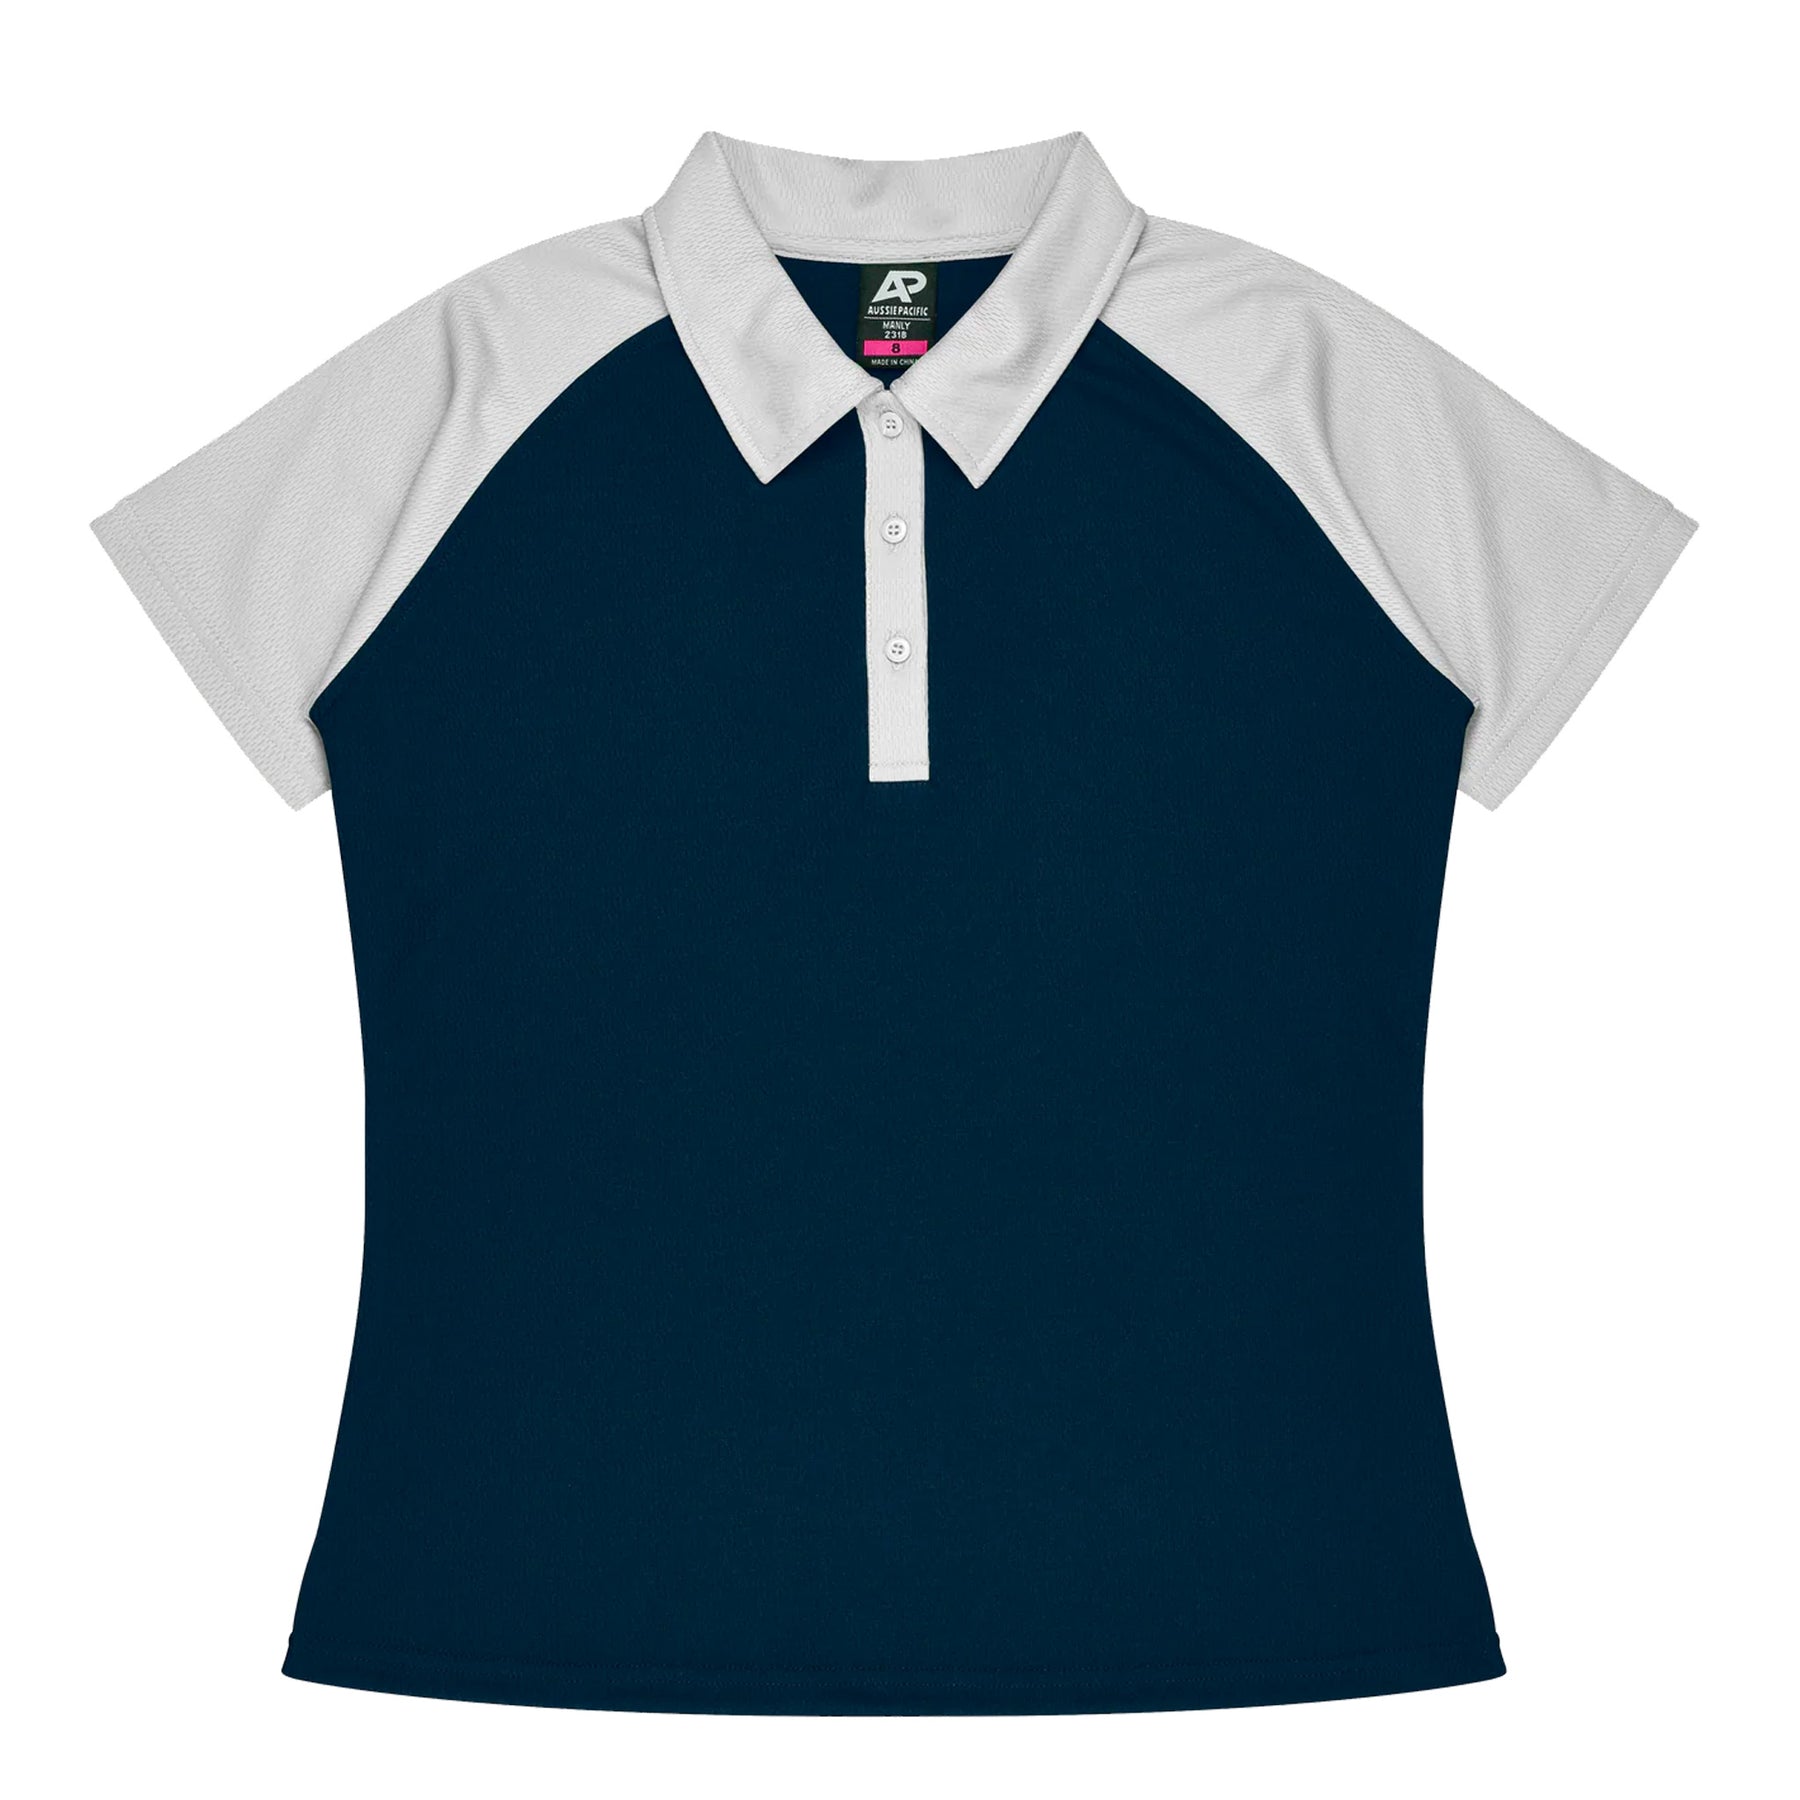 manly ladies polo in navy white